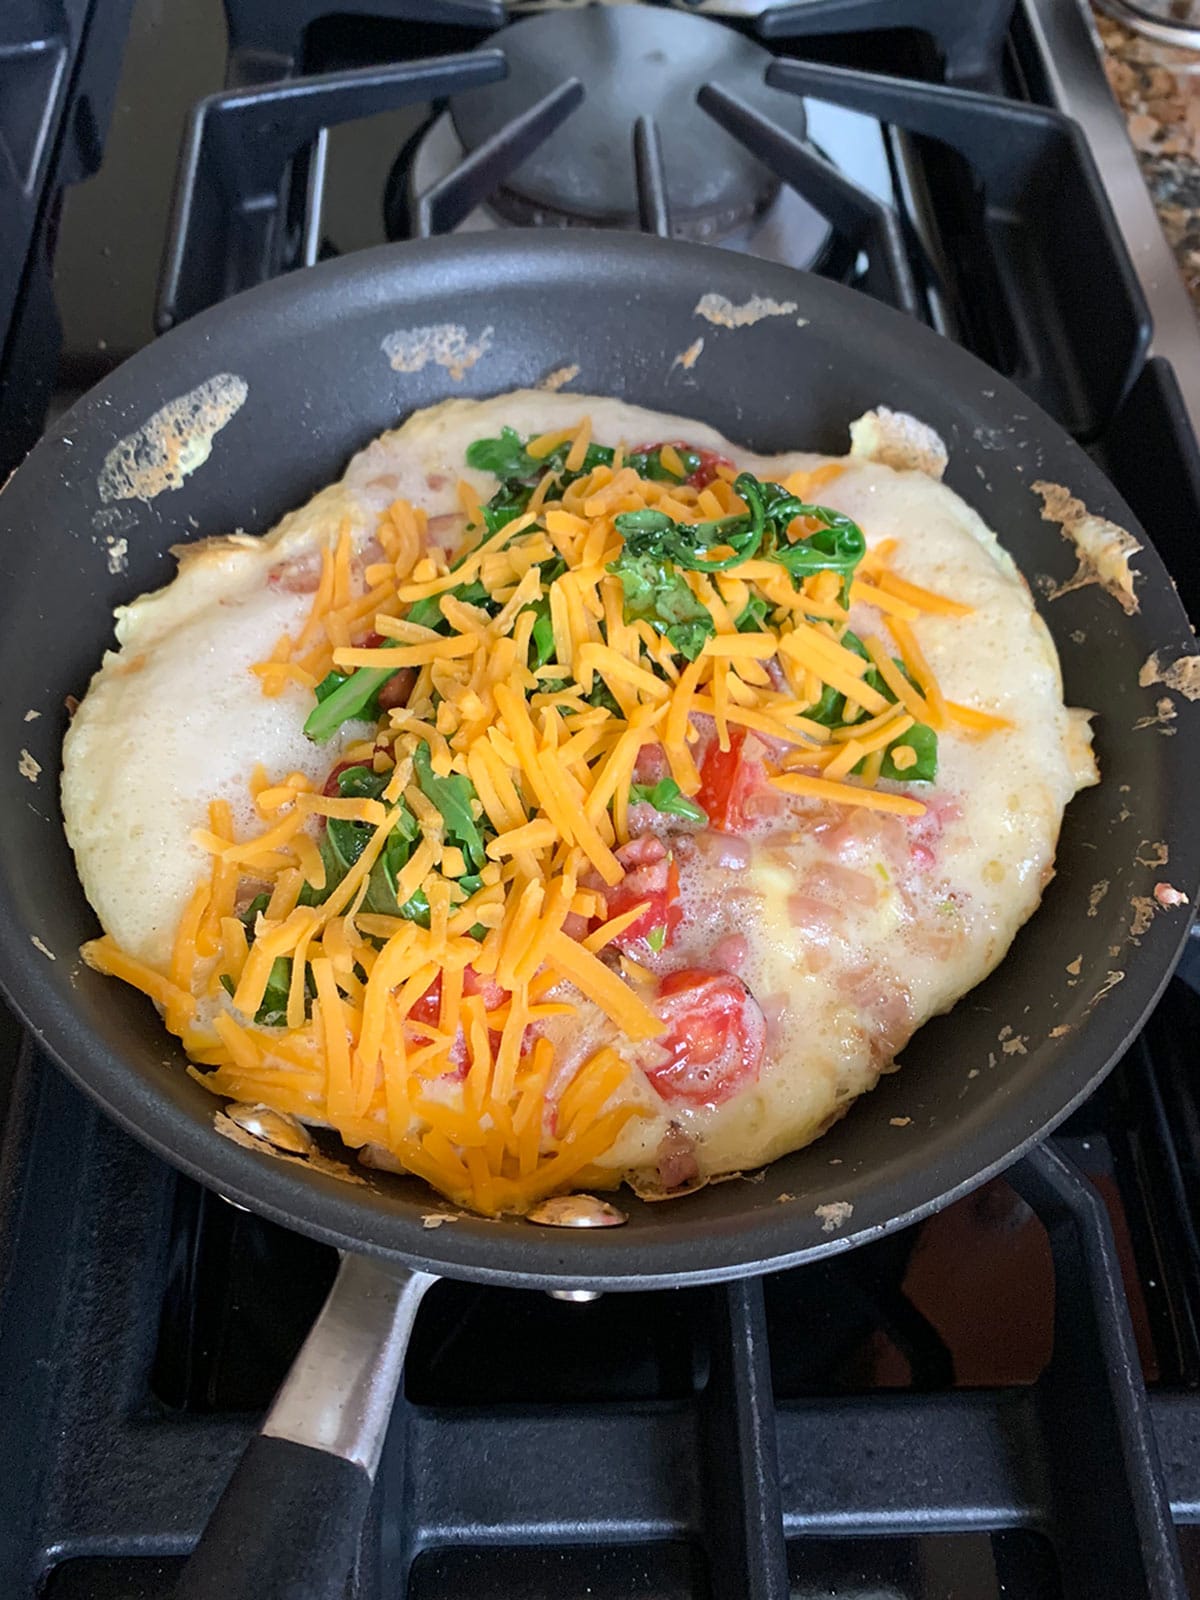 Omelette in pan with fillings layered on top in a sauté pan cooking on the stove.